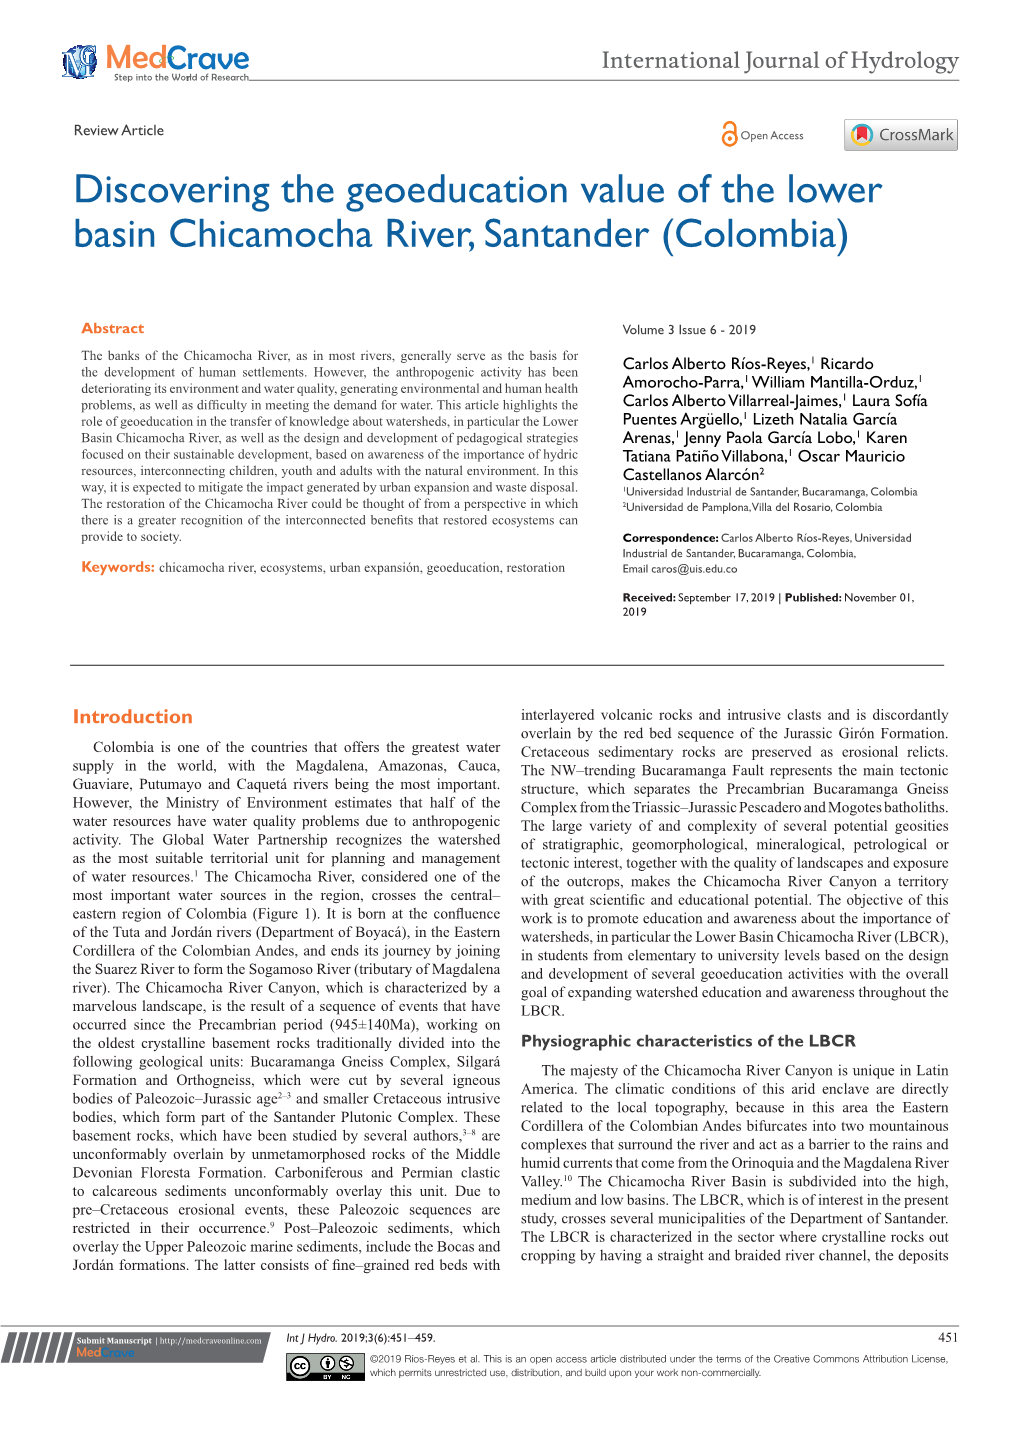 Discovering the Geoeducation Value of the Lower Basin Chicamocha River, Santander (Colombia)